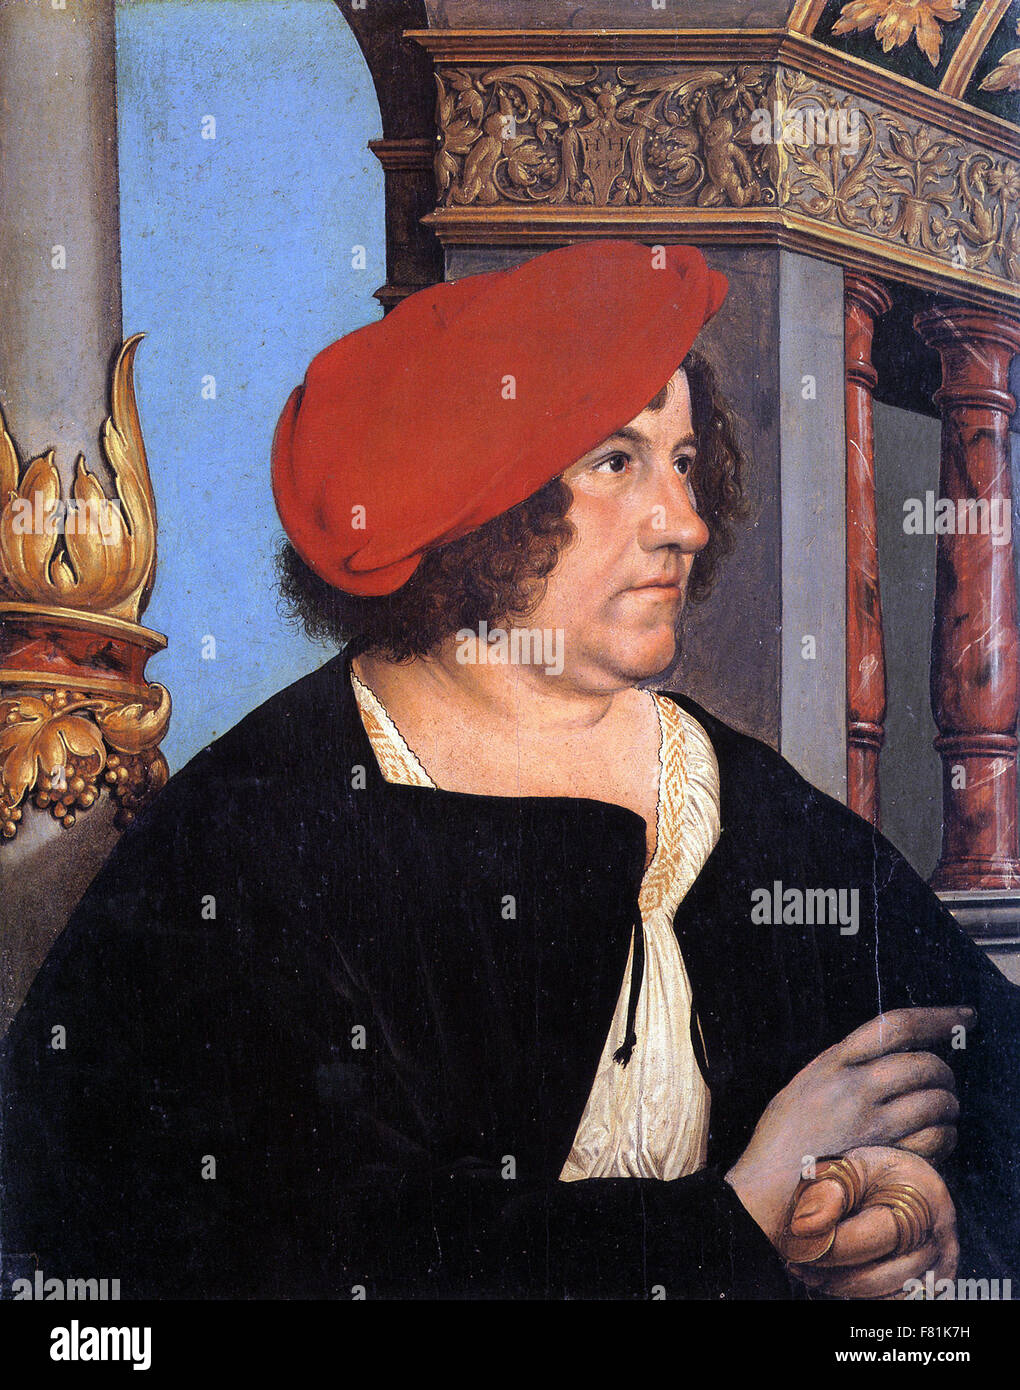 Hans Holbein the Younger - Portrait of Jakob Meyer zum Hasen Stock Photo